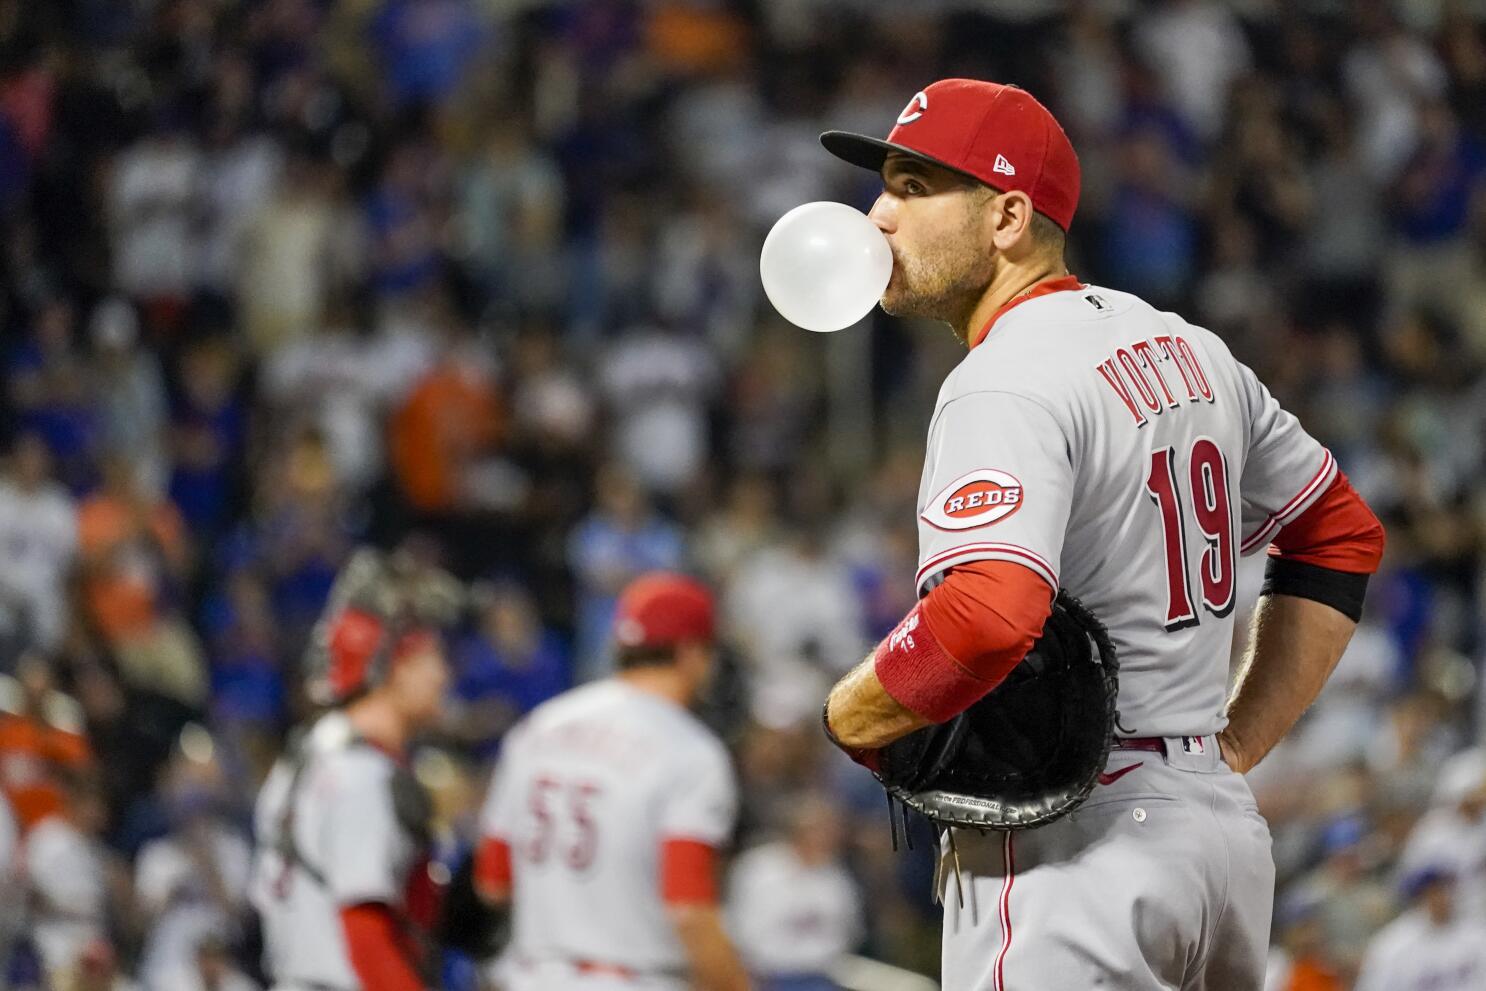 Votto homers in 7th straight game, Reds beat Mets 6-2